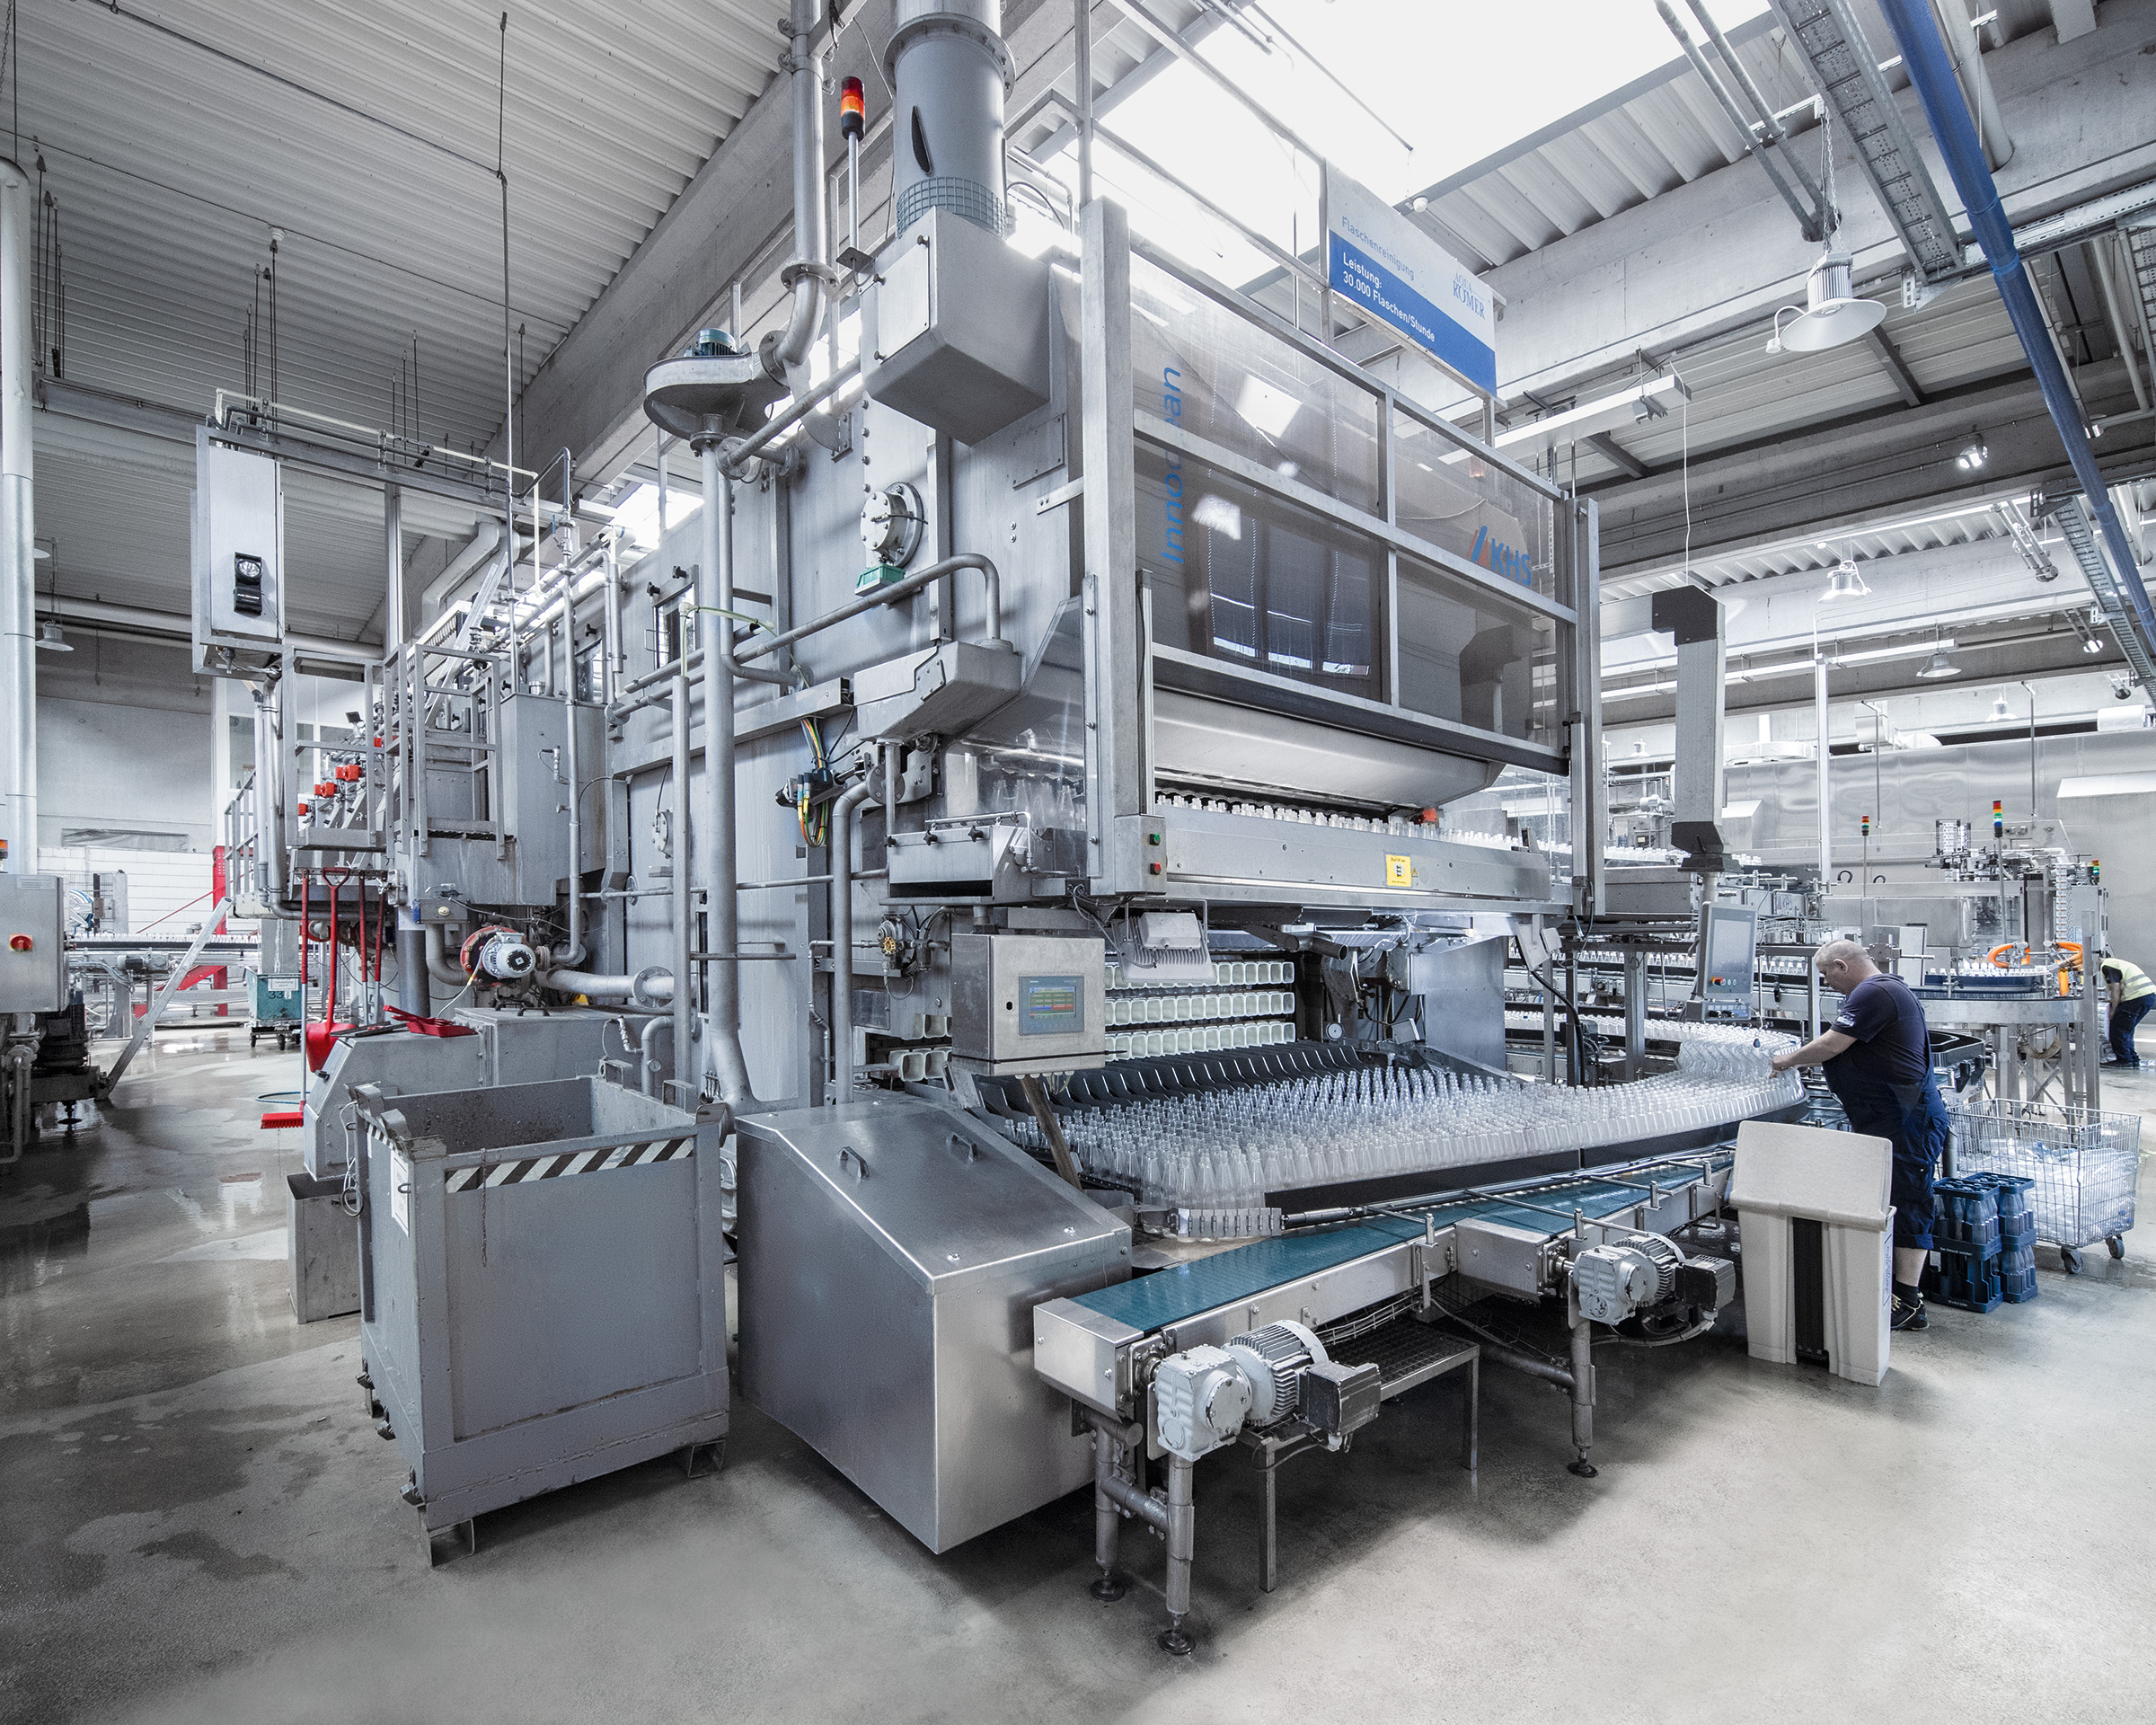 Conversion instead of new investment: KHS boosts efficiency and economy in bottle  washing, KHS GmbH, Story - PresseBox